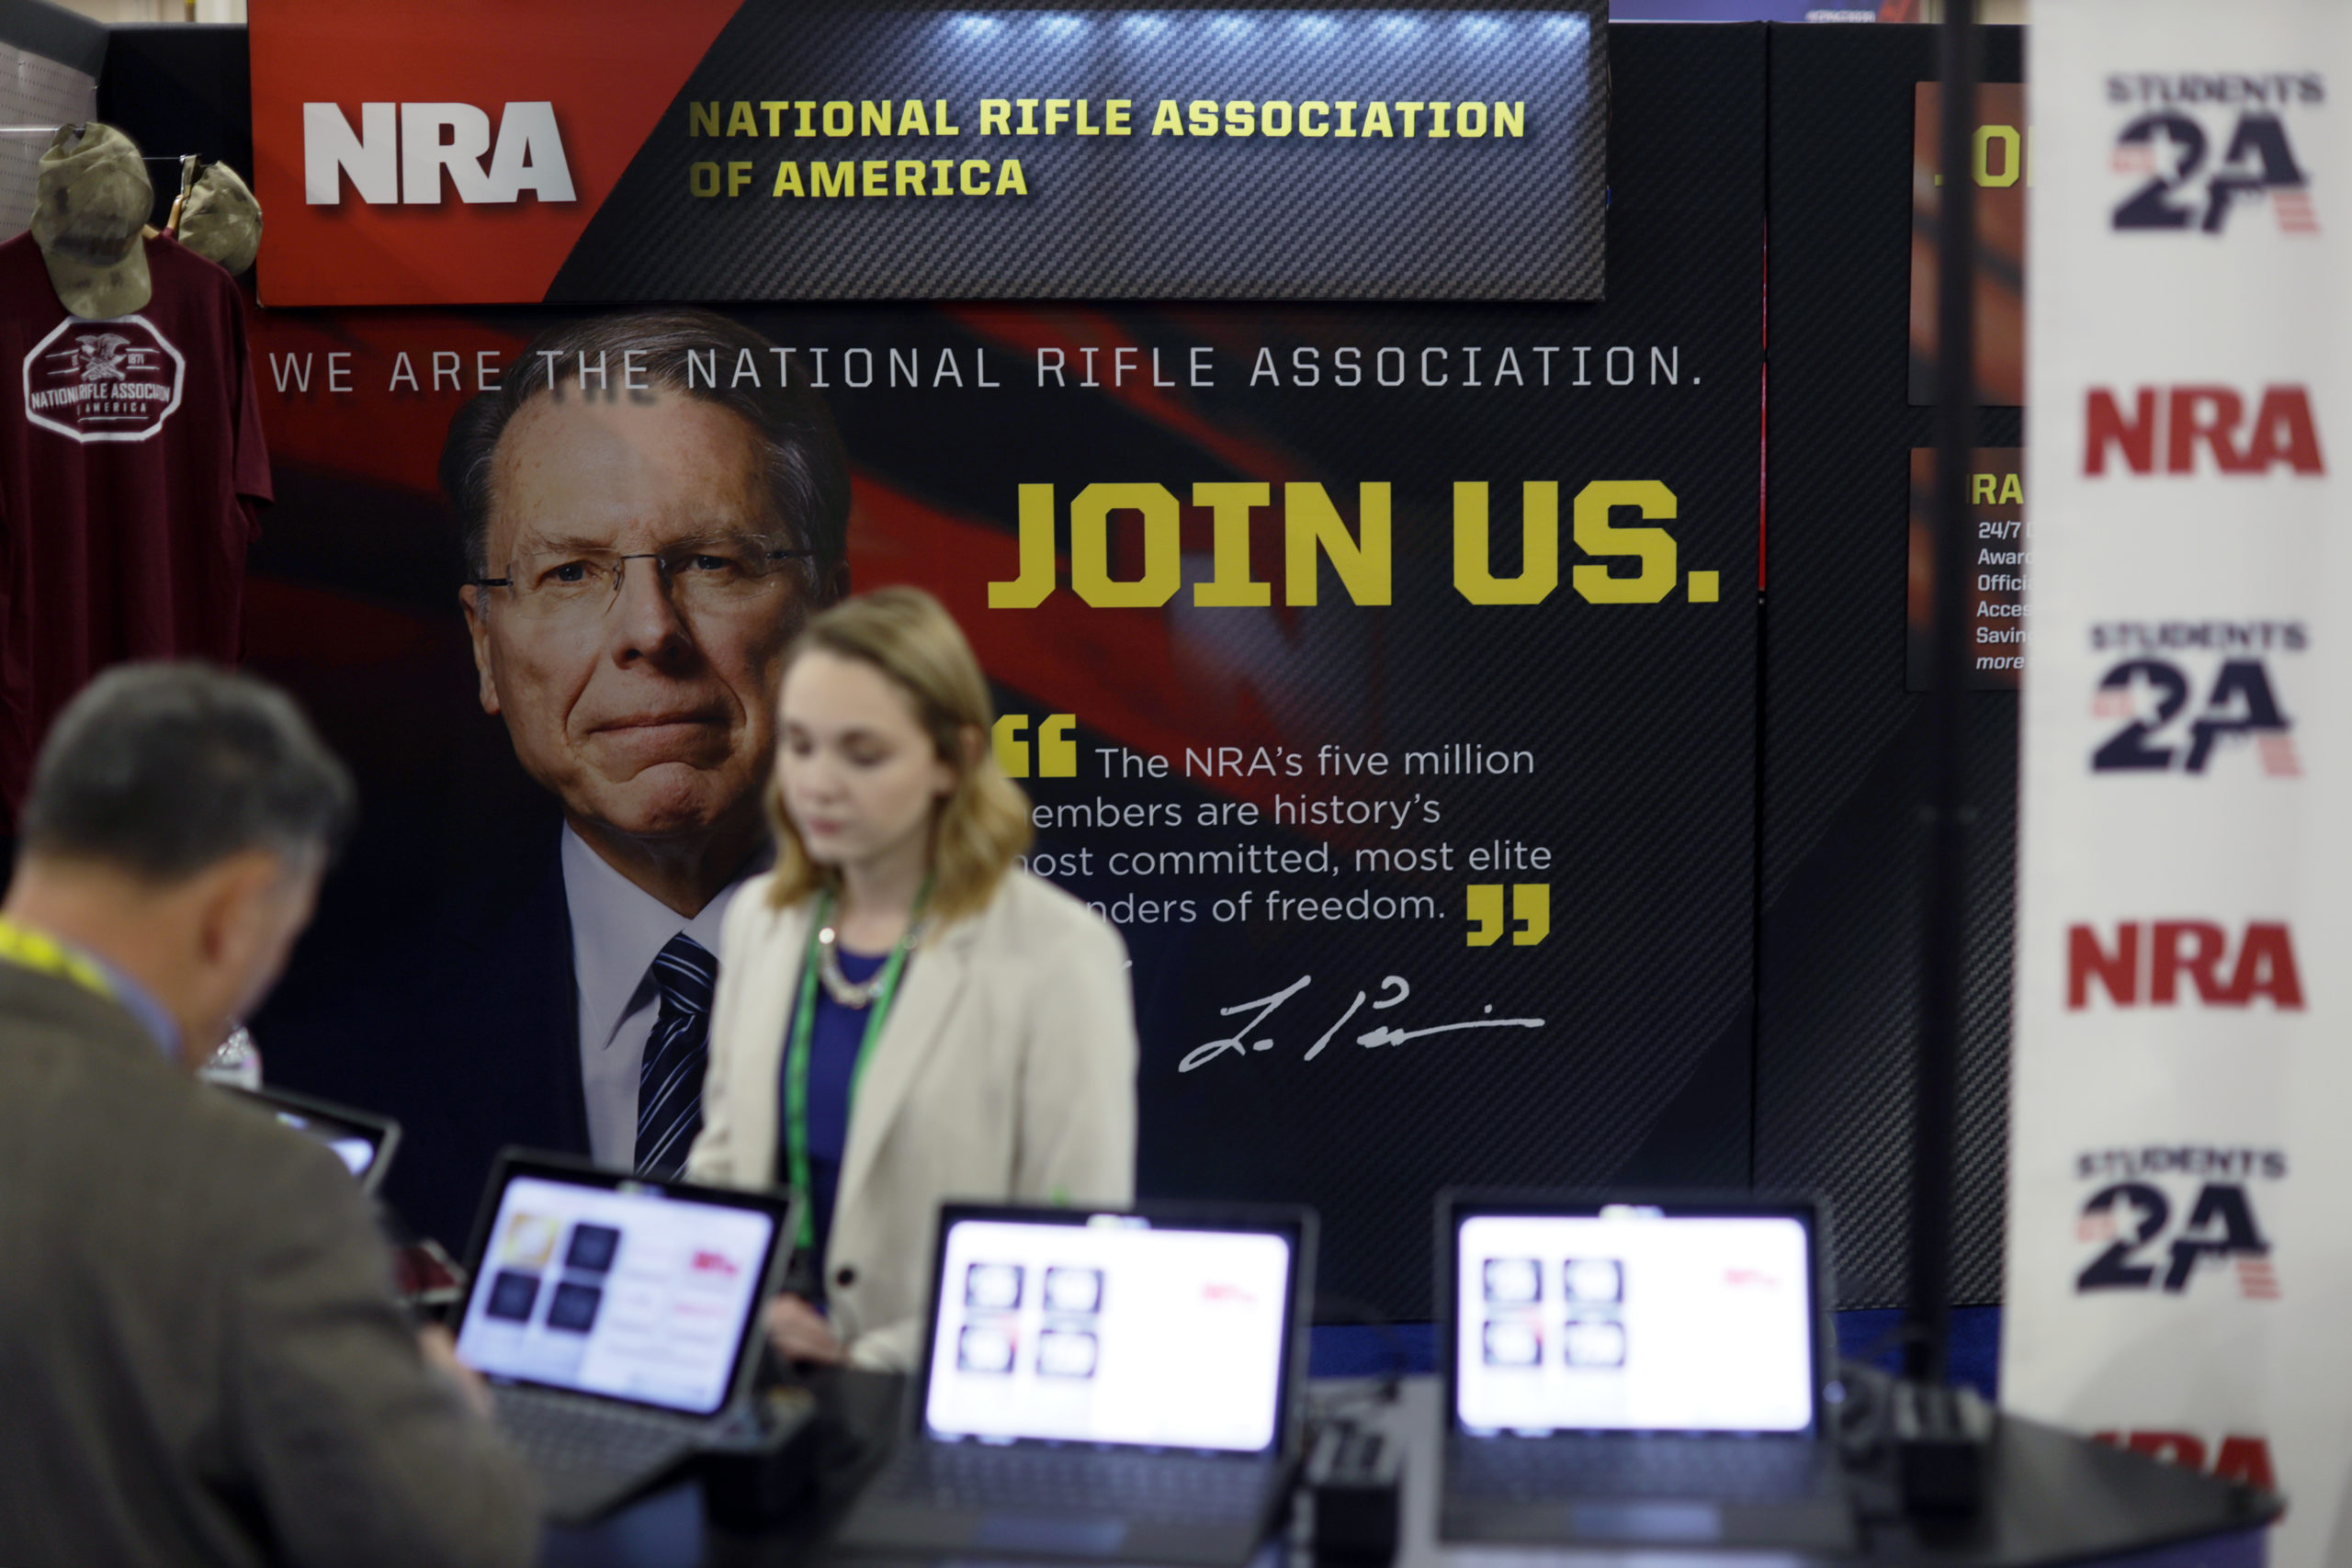 The booth of the National Rifle Association of America is seen at the annual Conservative Political Action Conference at Gaylord National Resort & Convention Center February 26, 2020 in National Harbor, Maryland. (Photo by Alex Wong/Getty Images)